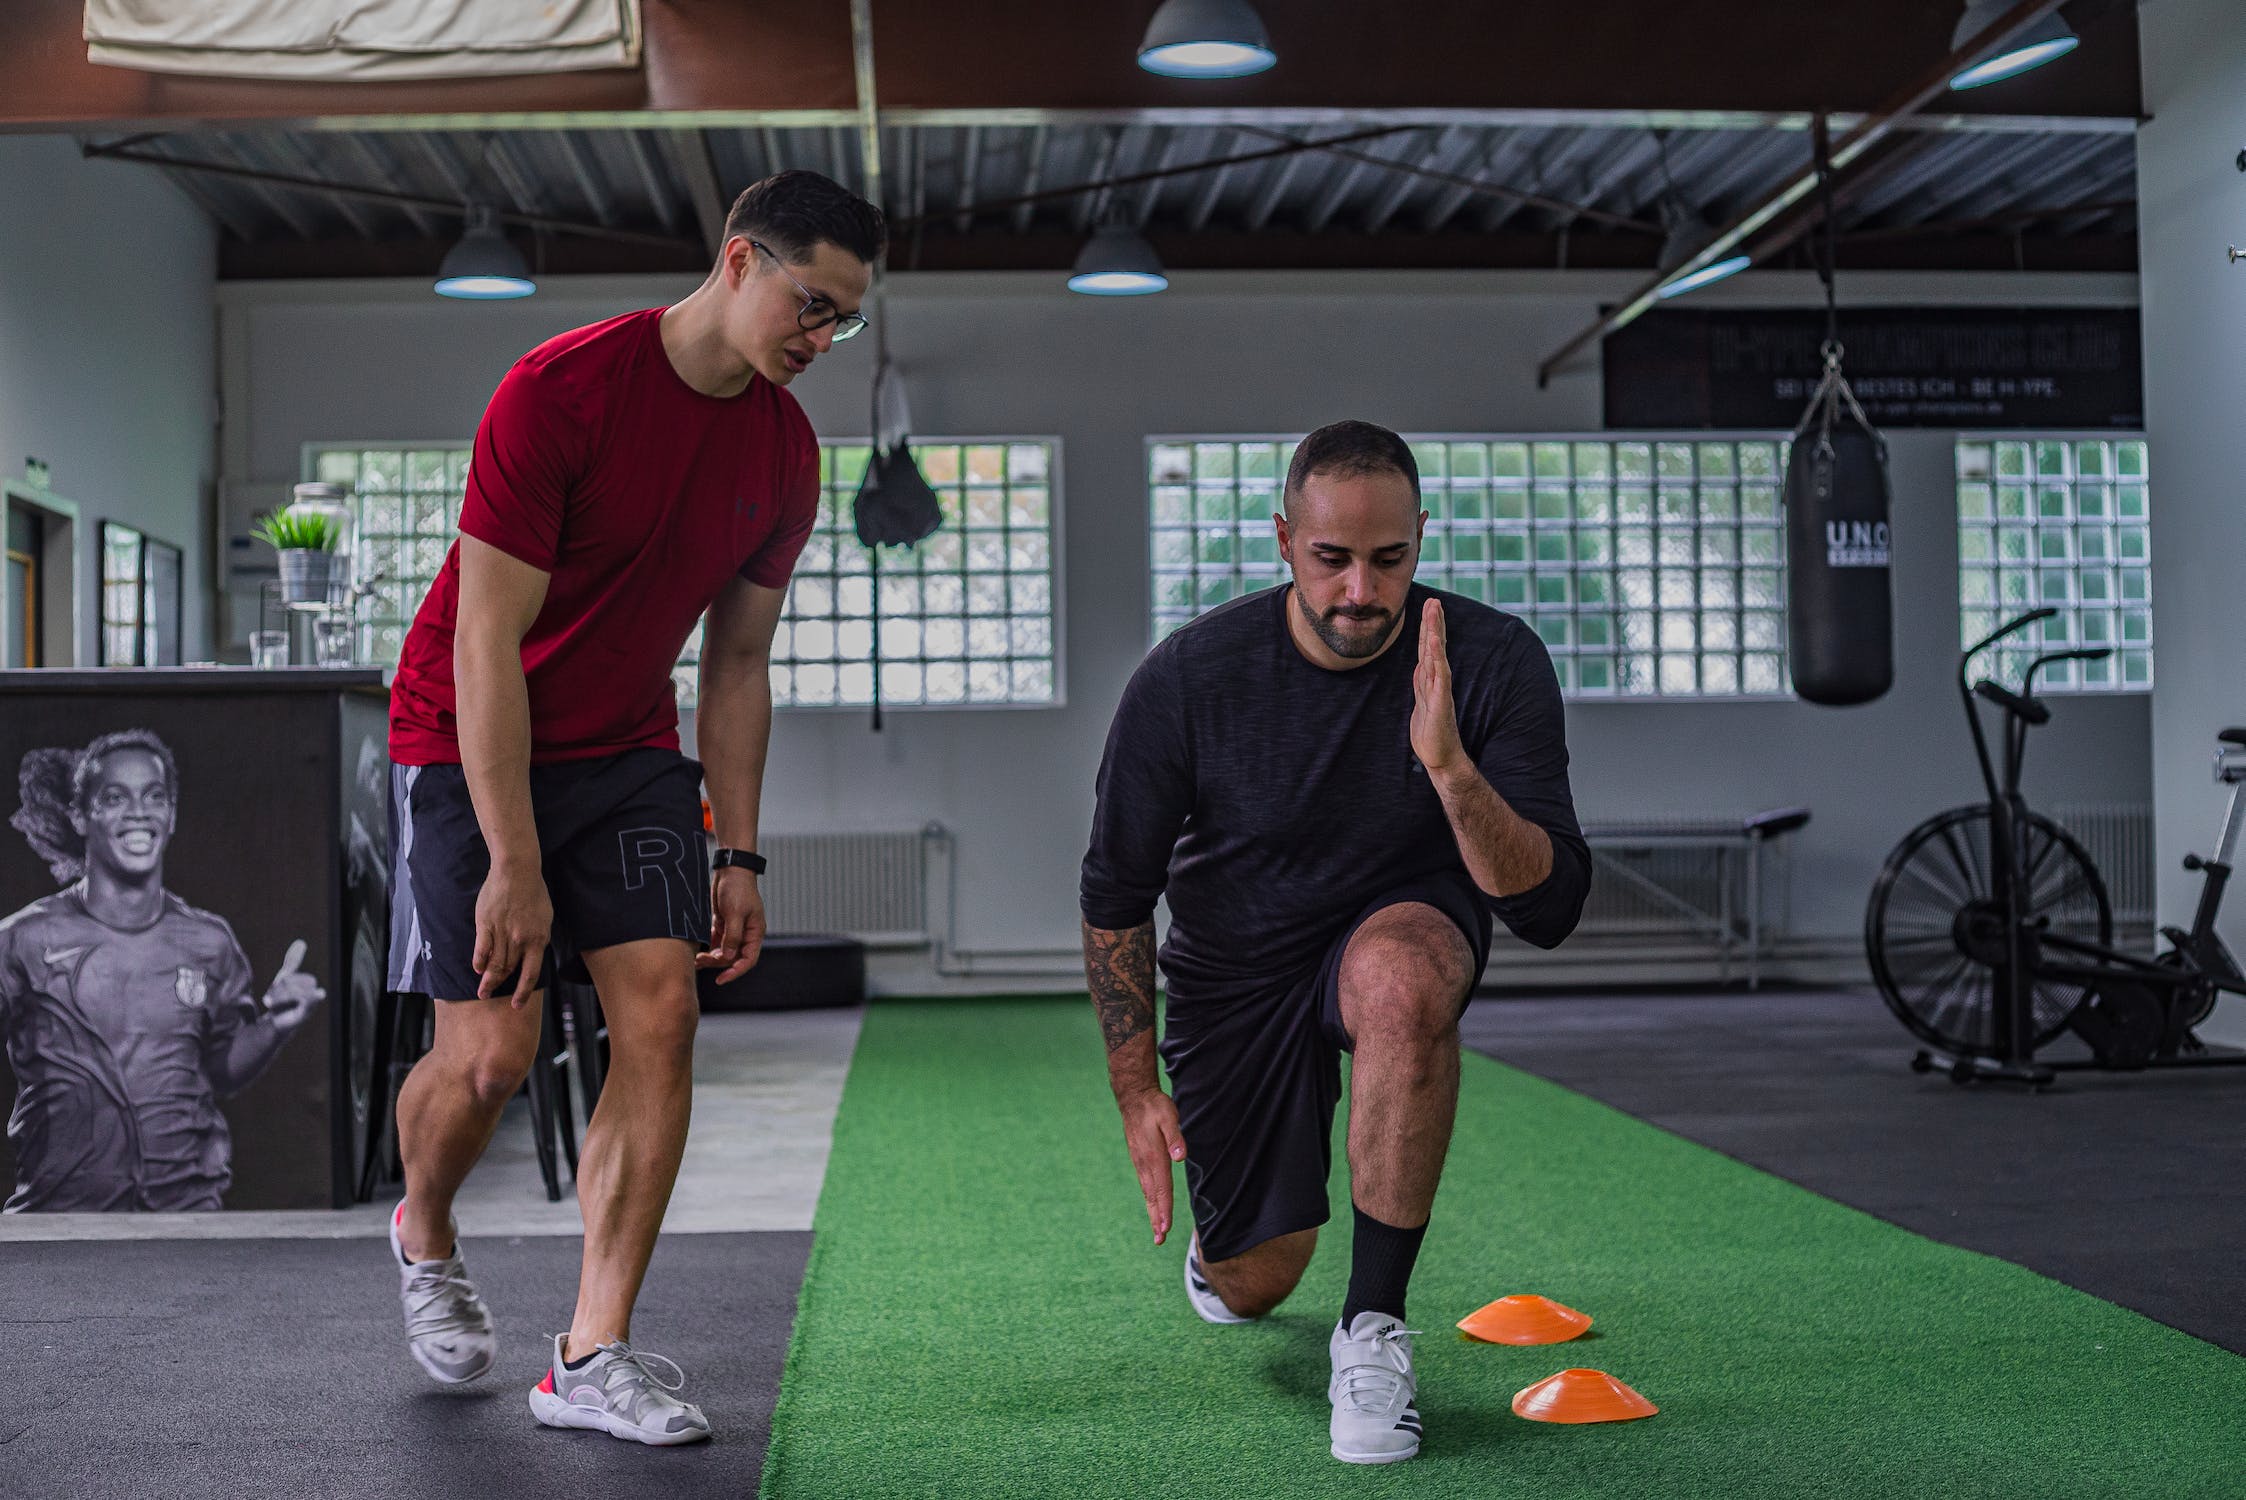 personal trainer advising a client